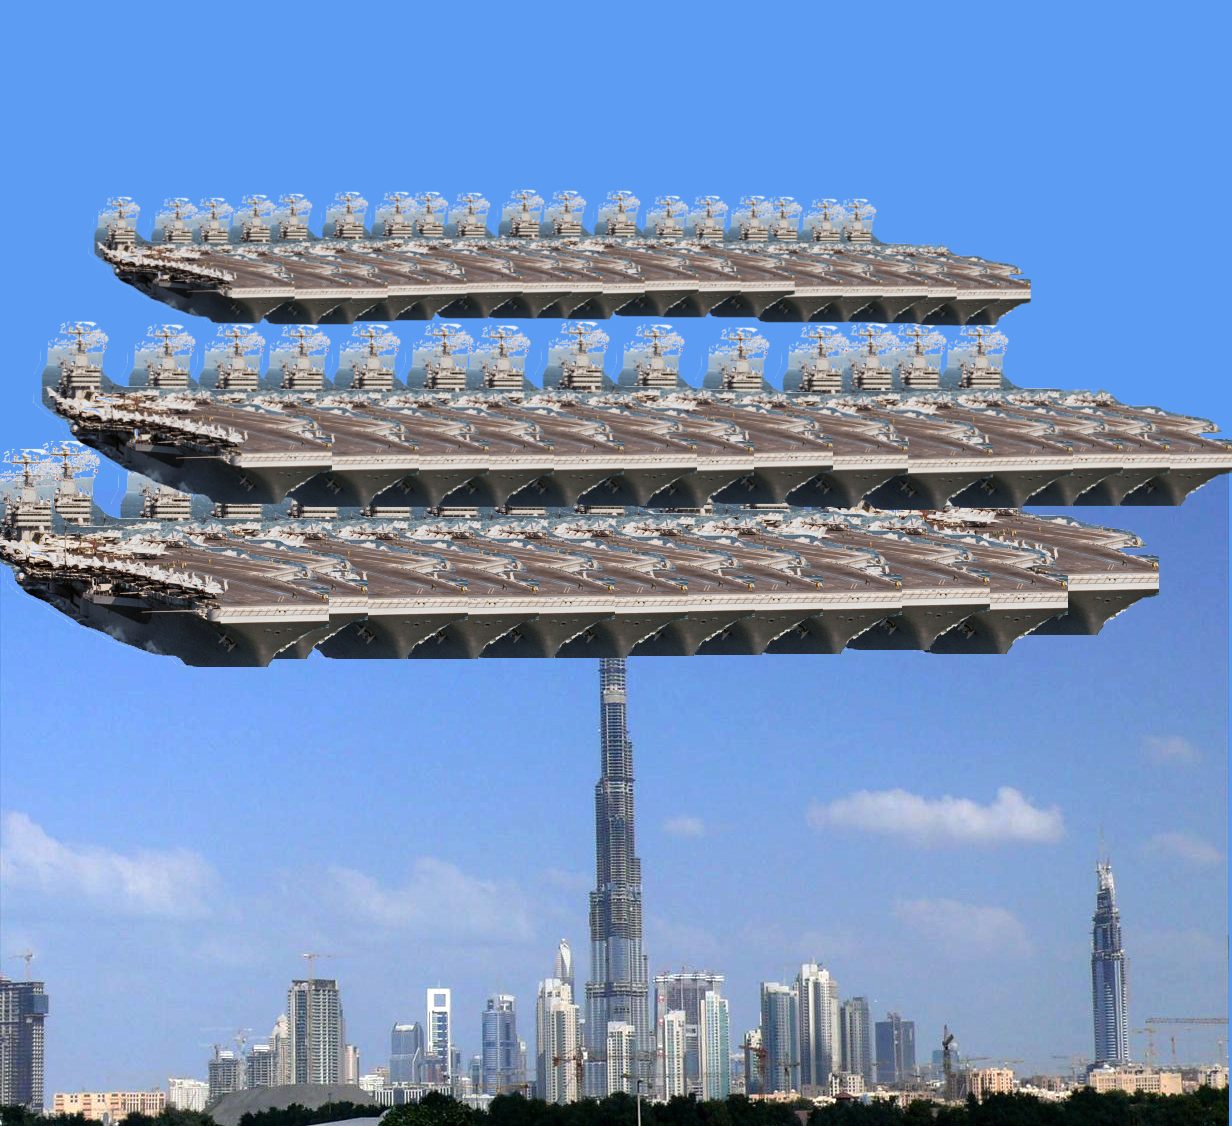 44 aircraft carriers on top of the Burj Khalifa